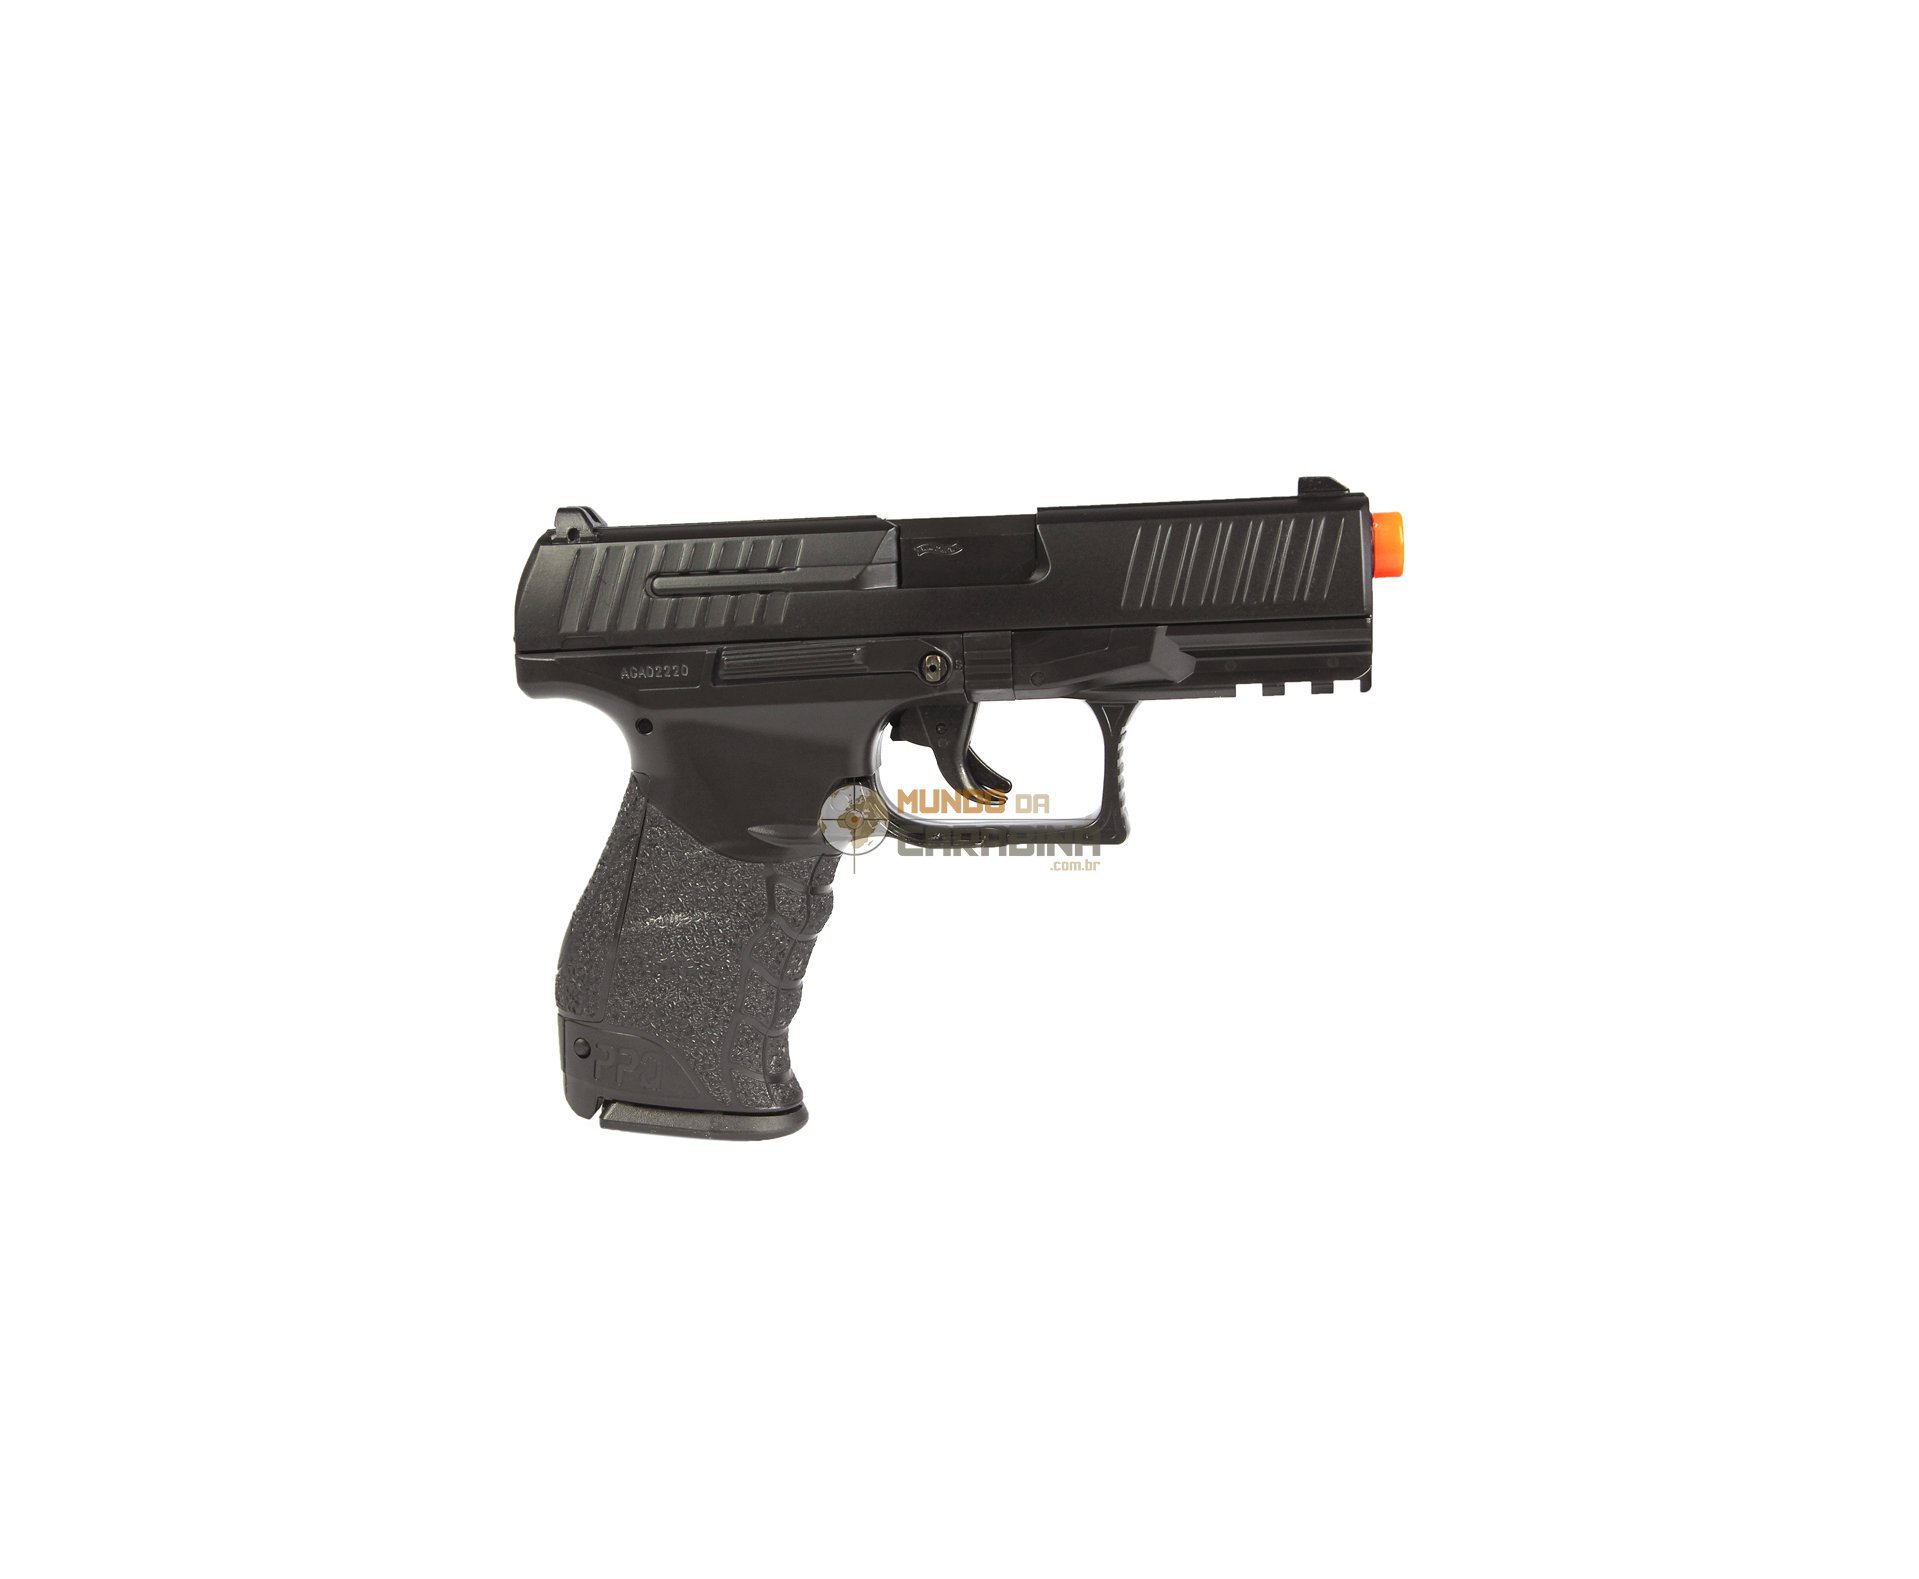 Pistola De Airsoft Walther Ppq Hme Full Metal 6mm